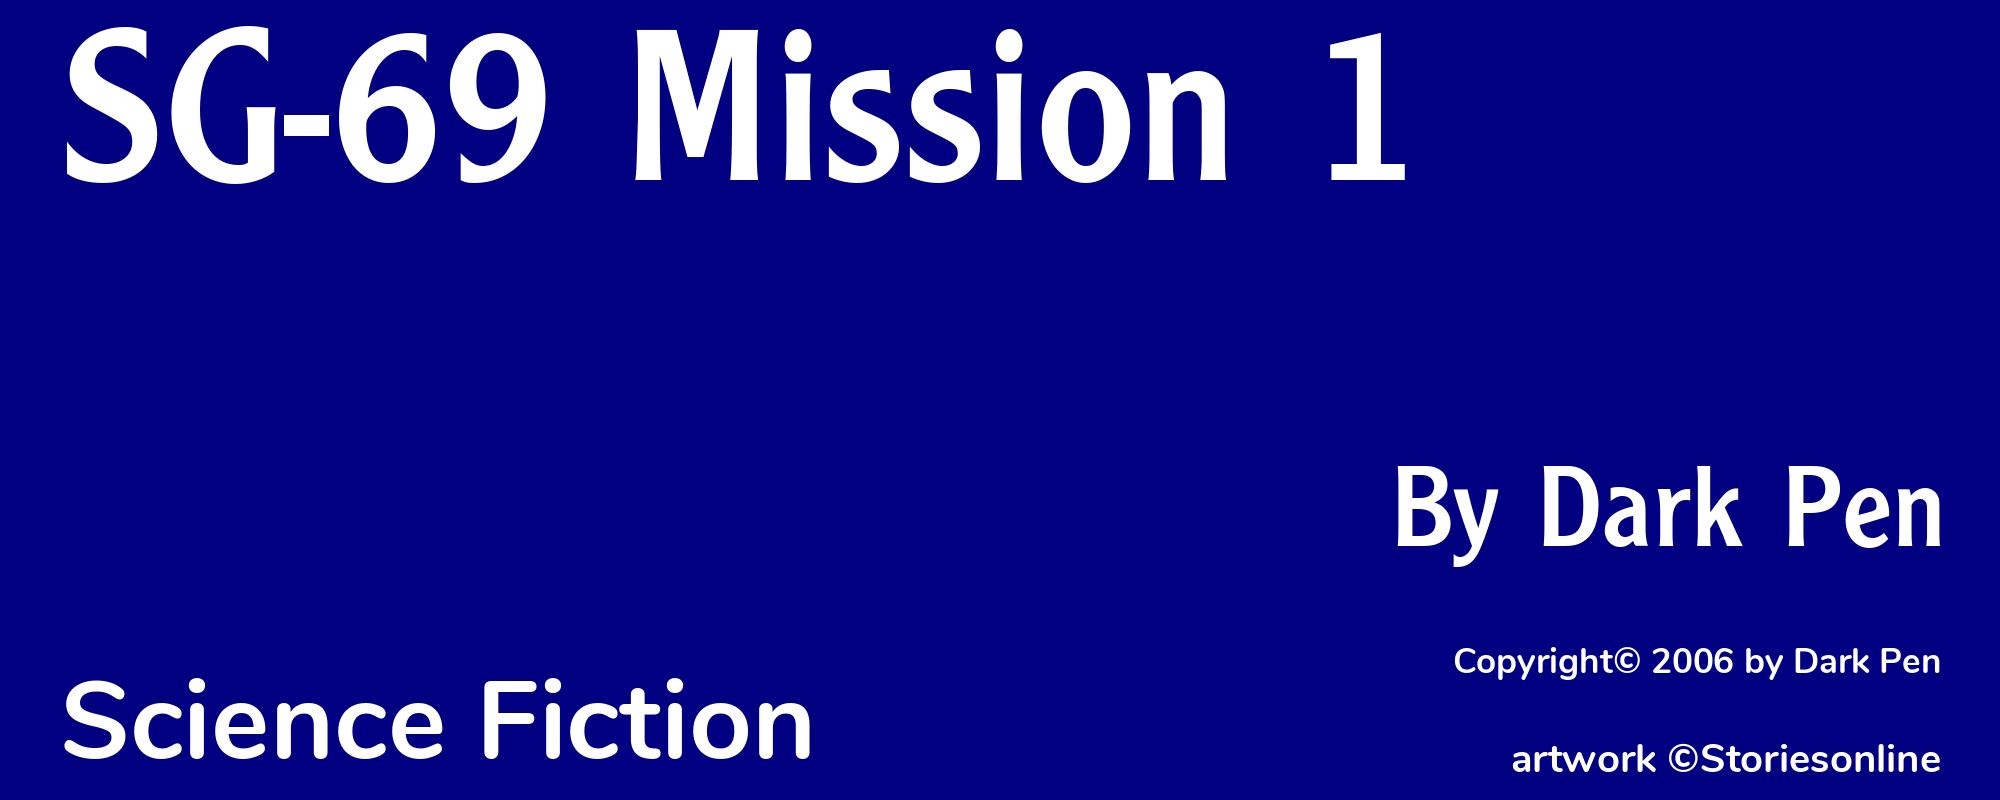 SG-69 Mission 1 - Cover